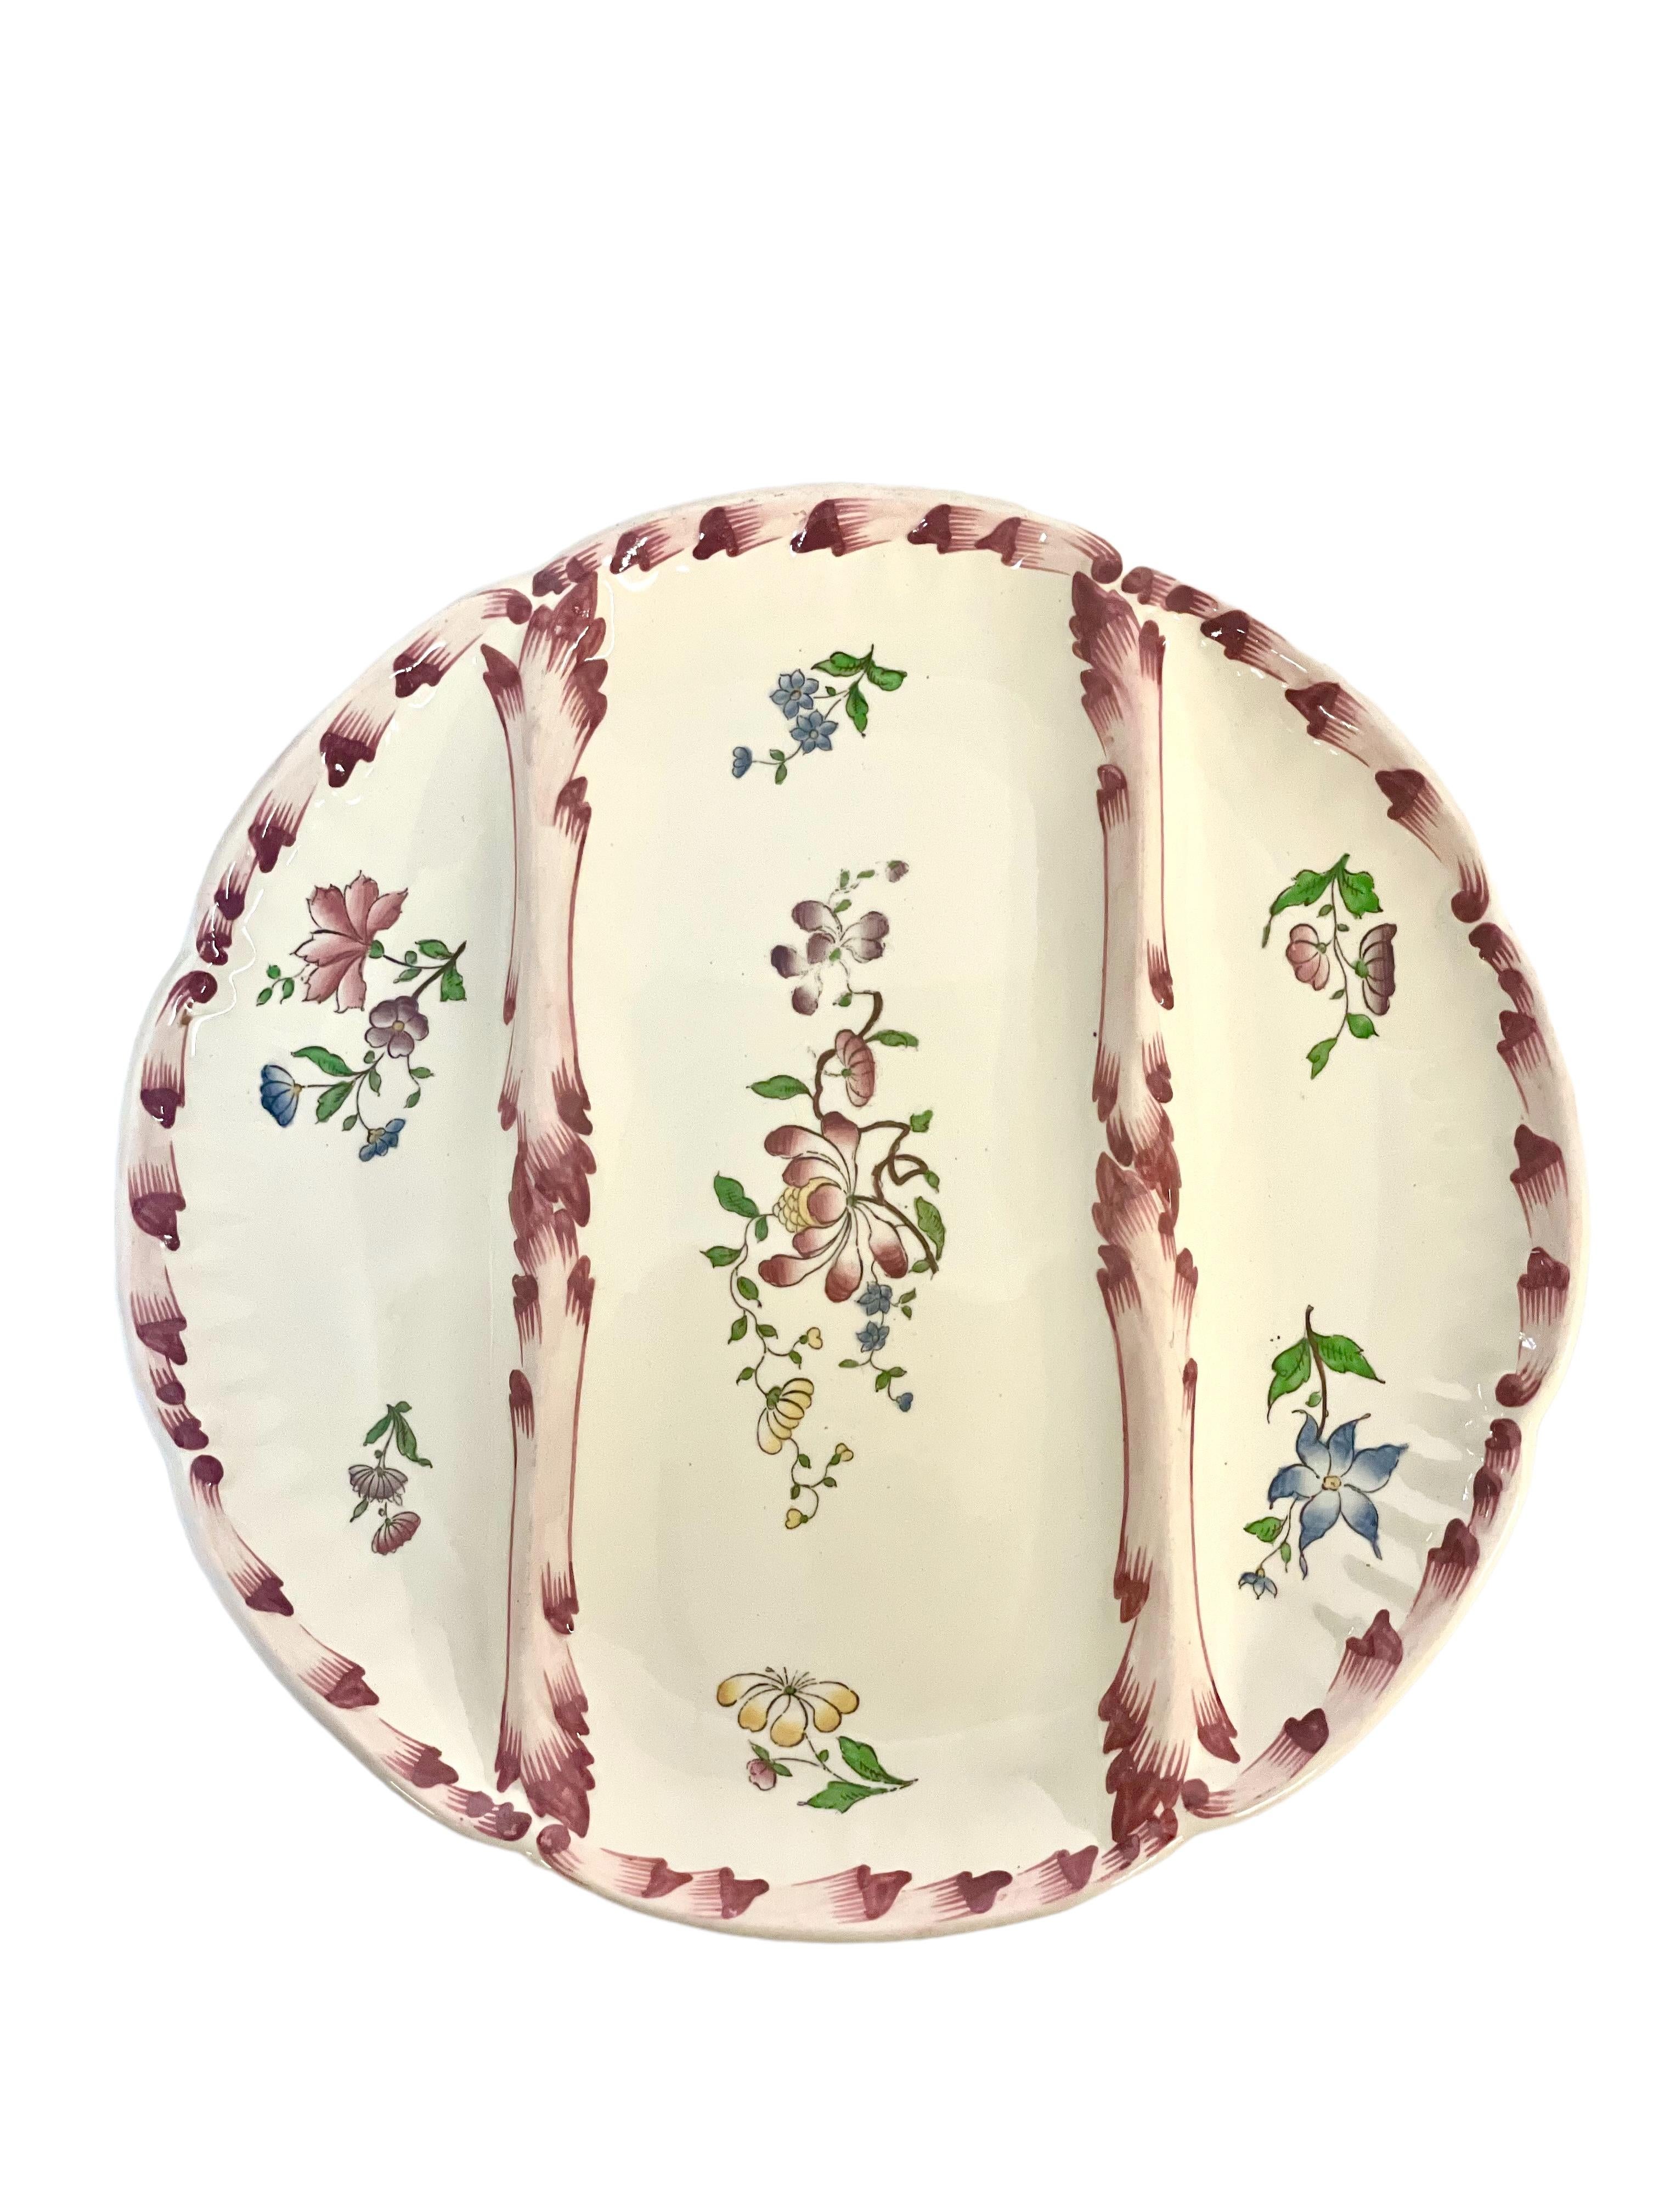 A set of 10 vintage Sarreguemines Majolica asparagus serving plates, from the beginning of the 20th century. Each of these fine earthenware plates has two raised, decorated dividers, which gives each plate three sections, beautifully decorated with